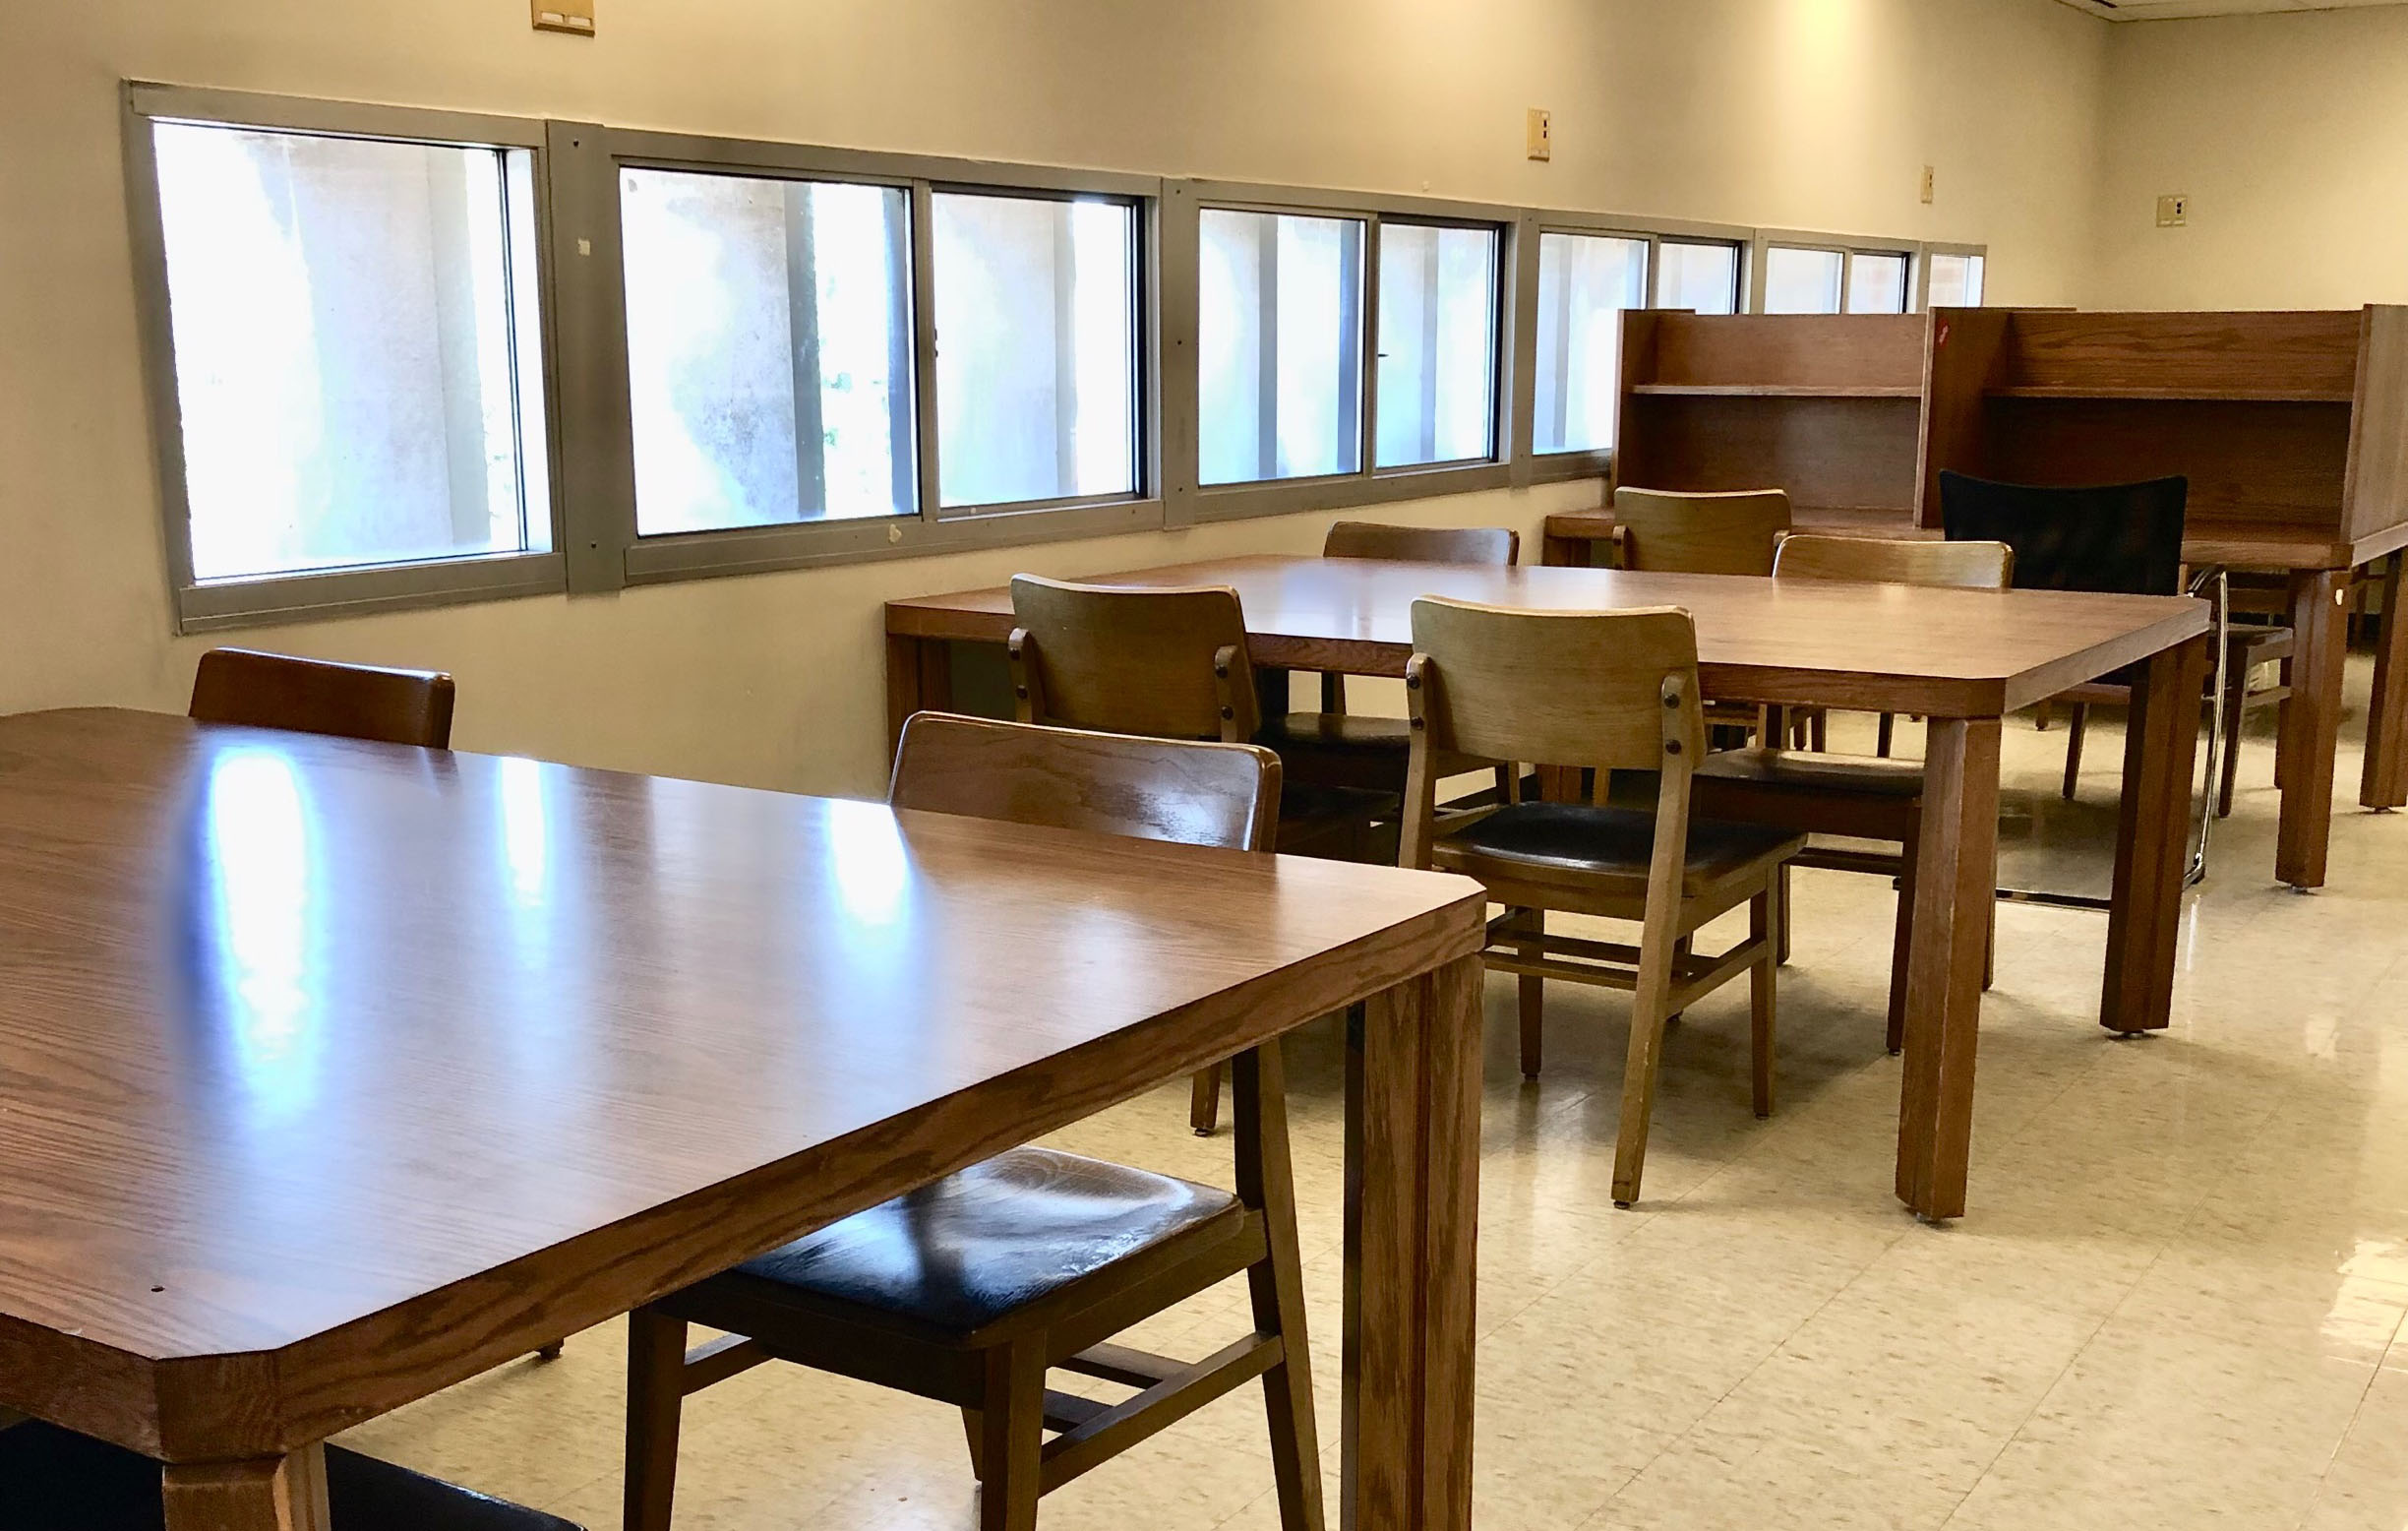 a row of study tables, with 4 chairs at each table.